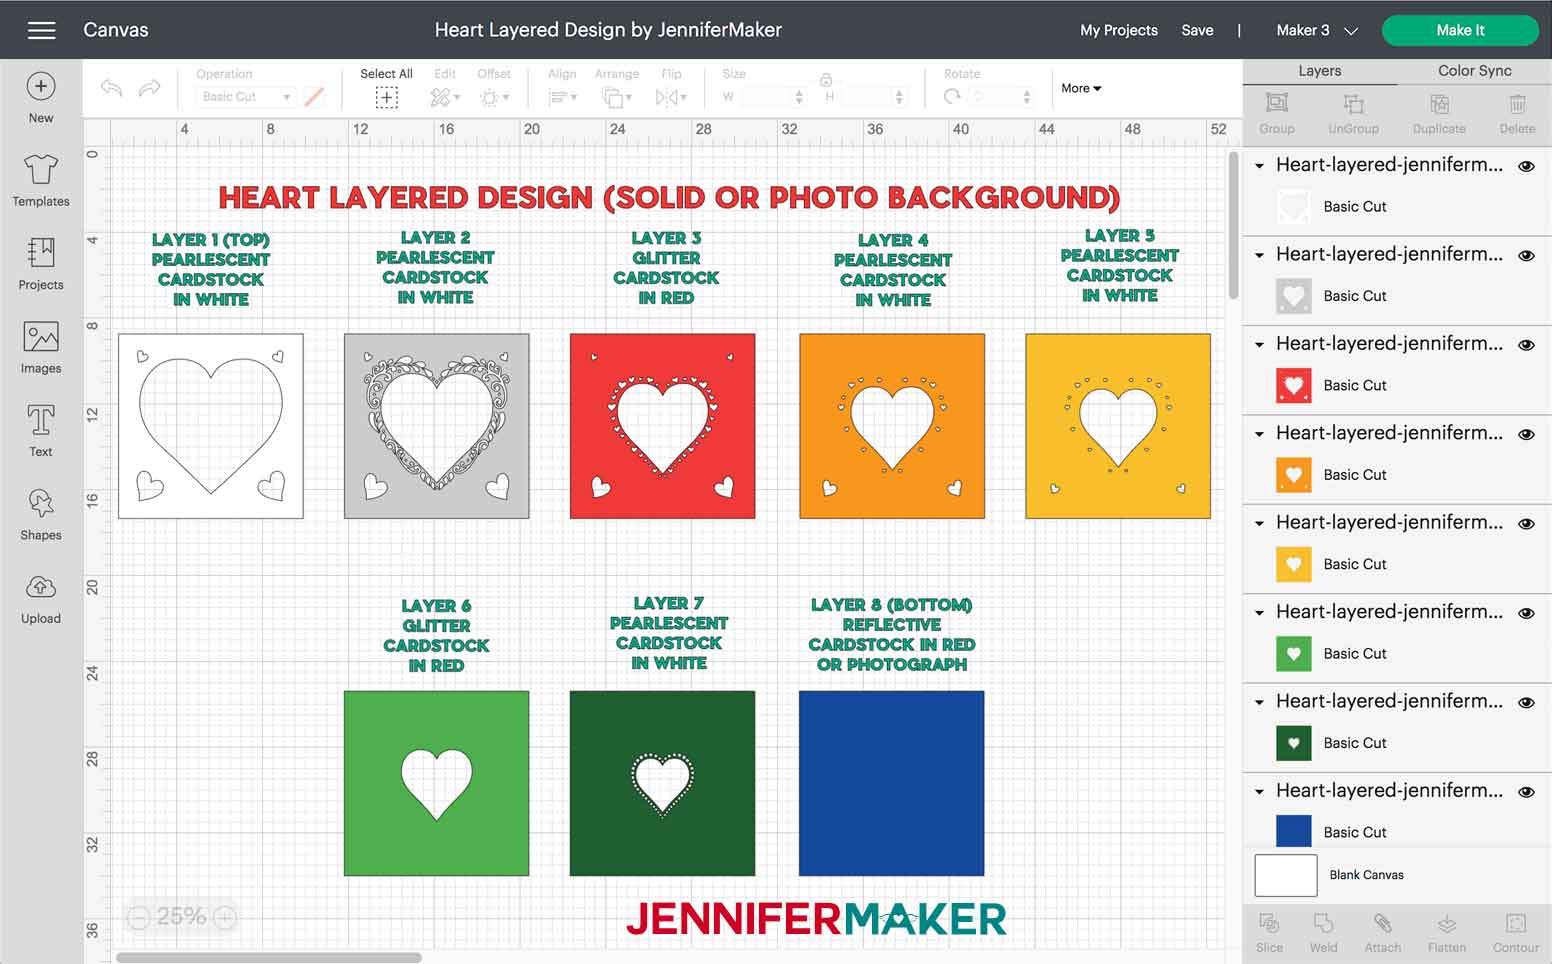 Layer order and materials used to cut solid background heart layered SVG